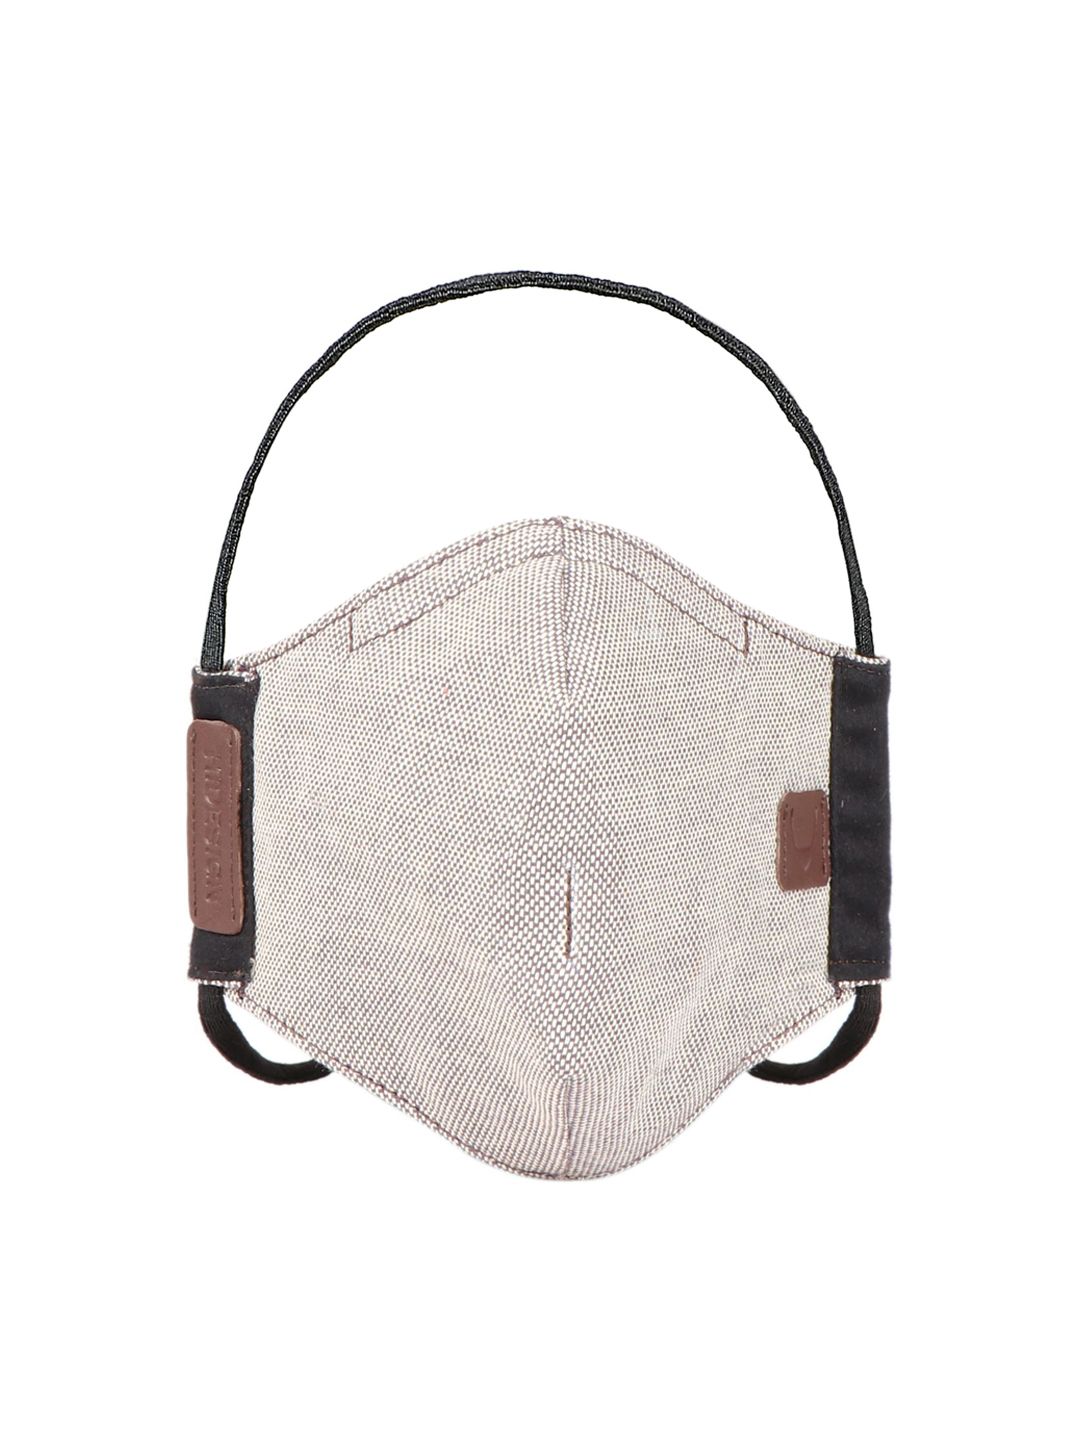 Hidesign Brown & White Solid 1Ply Outdoor Cloth Mask Price in India